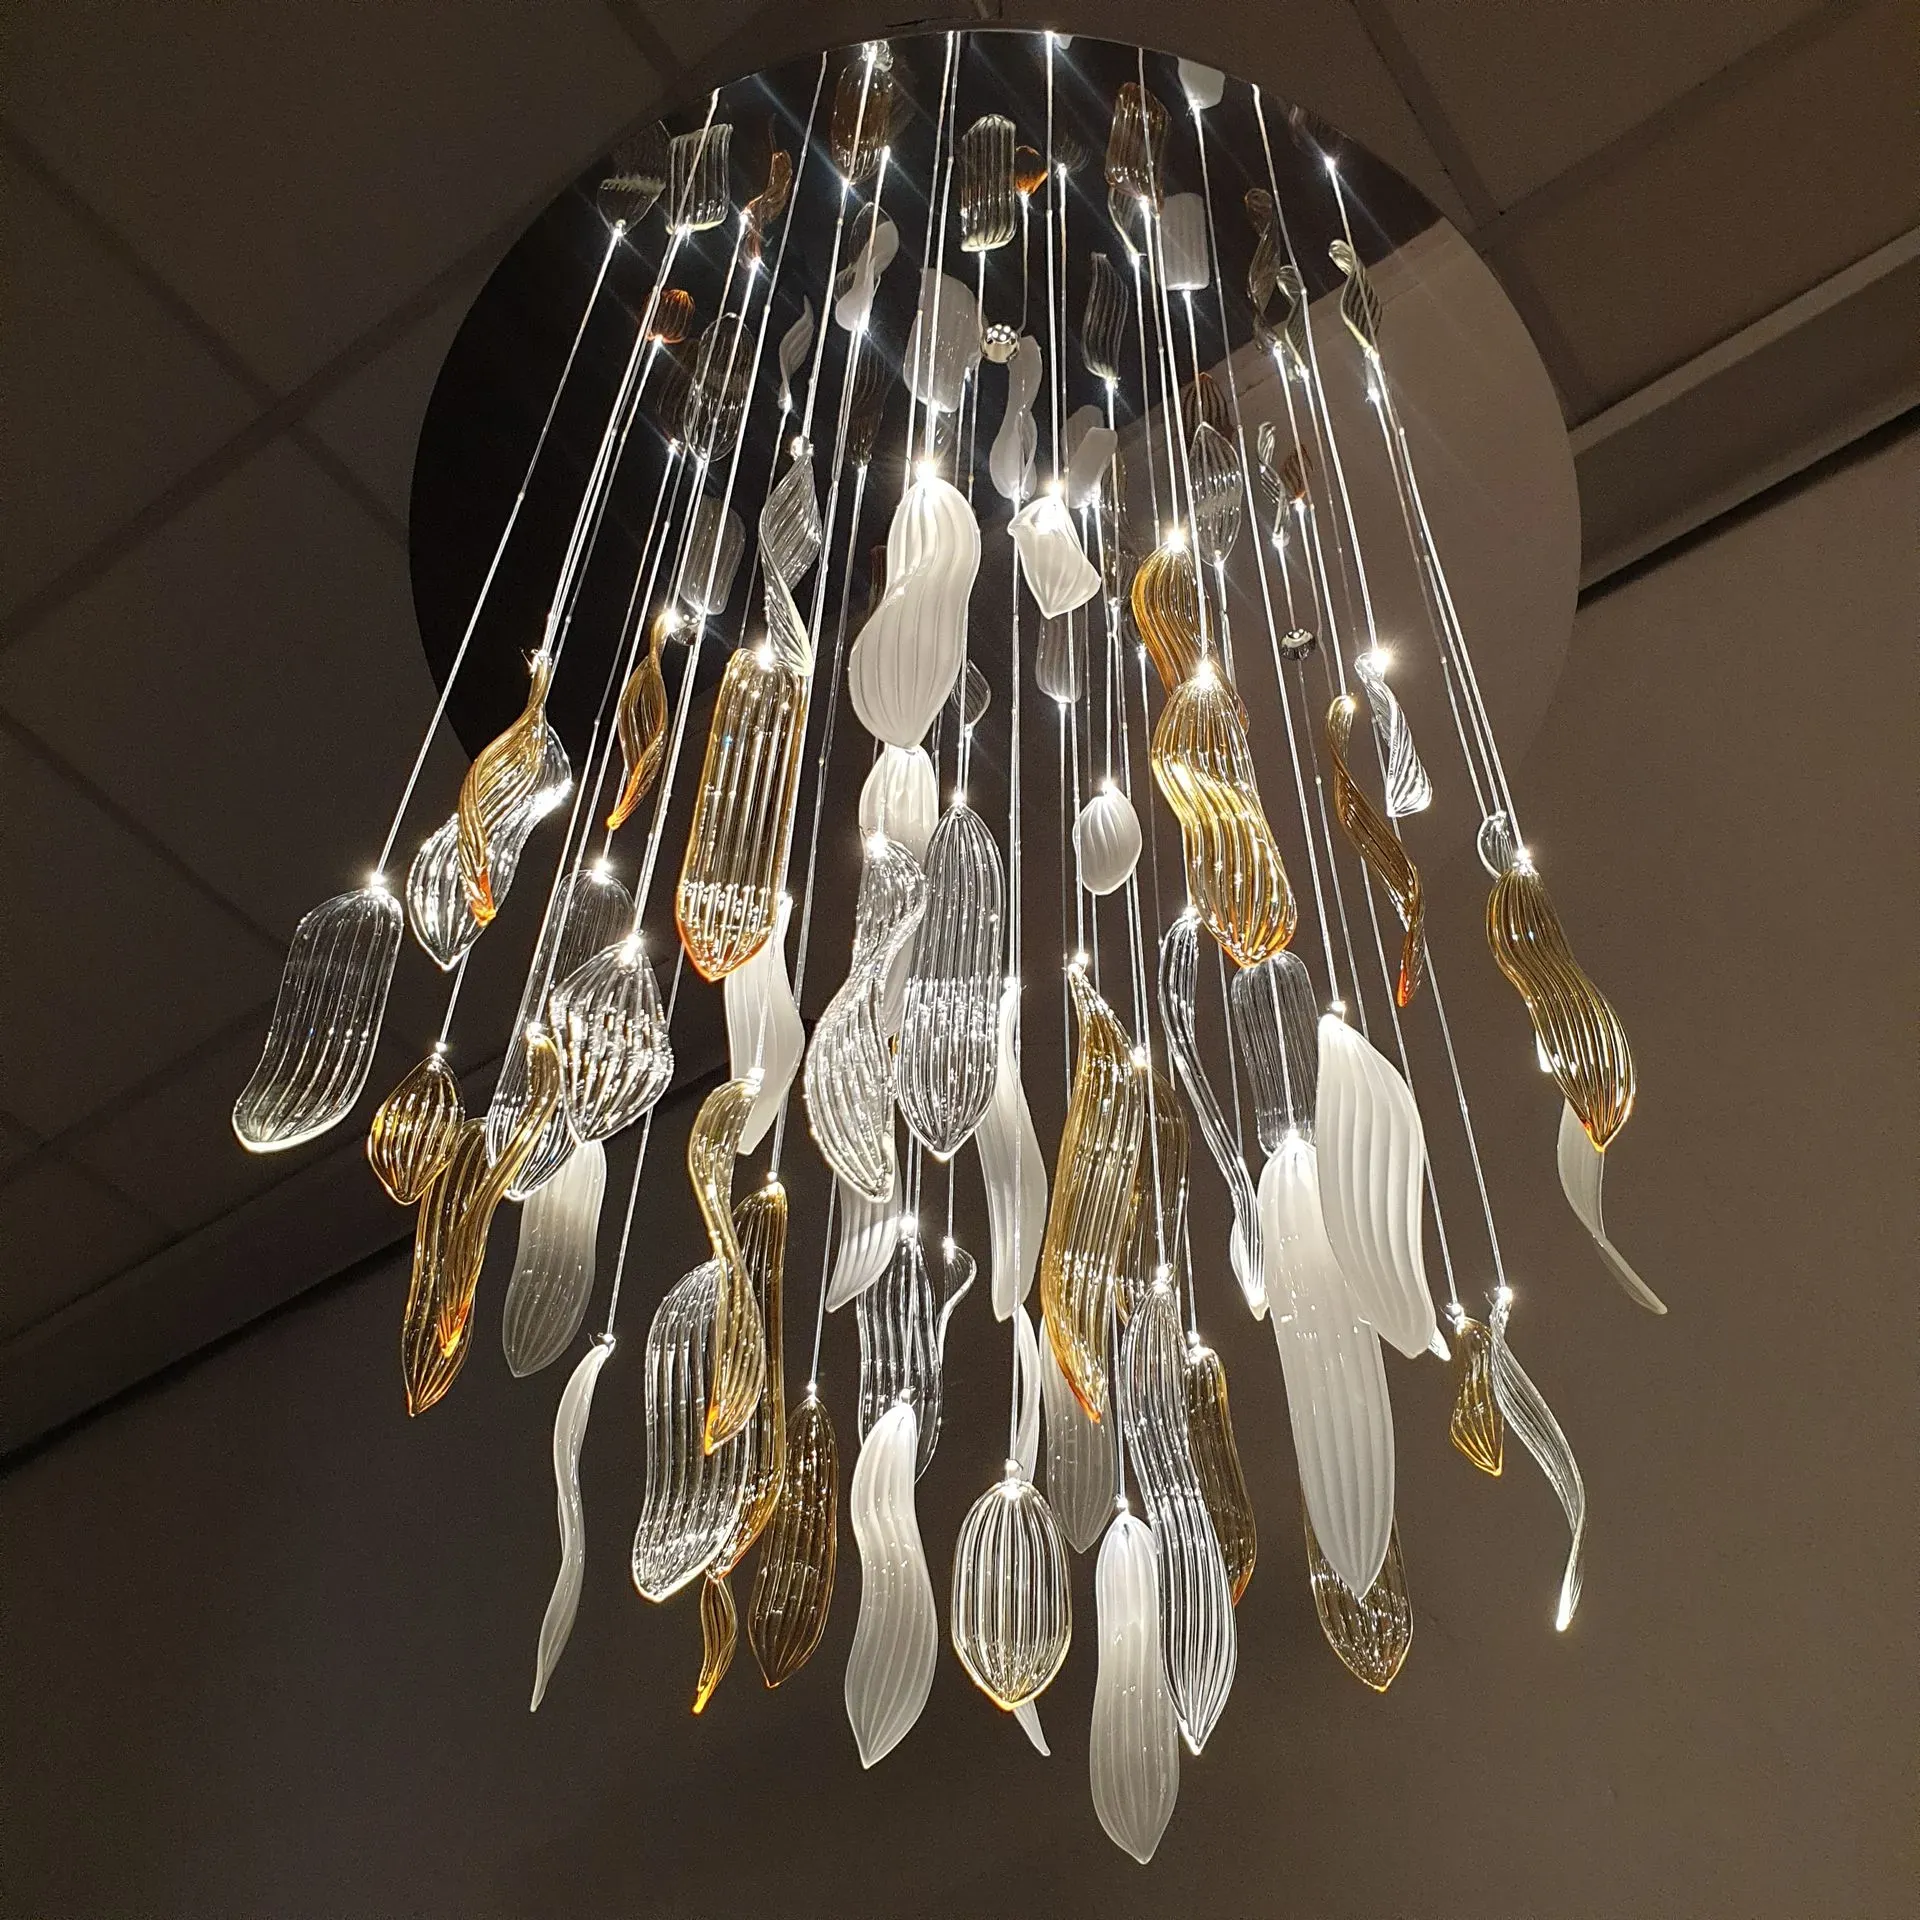 ASTER modern fibre optic decorative chandelier with glass leaves and downlights golden glass leaves